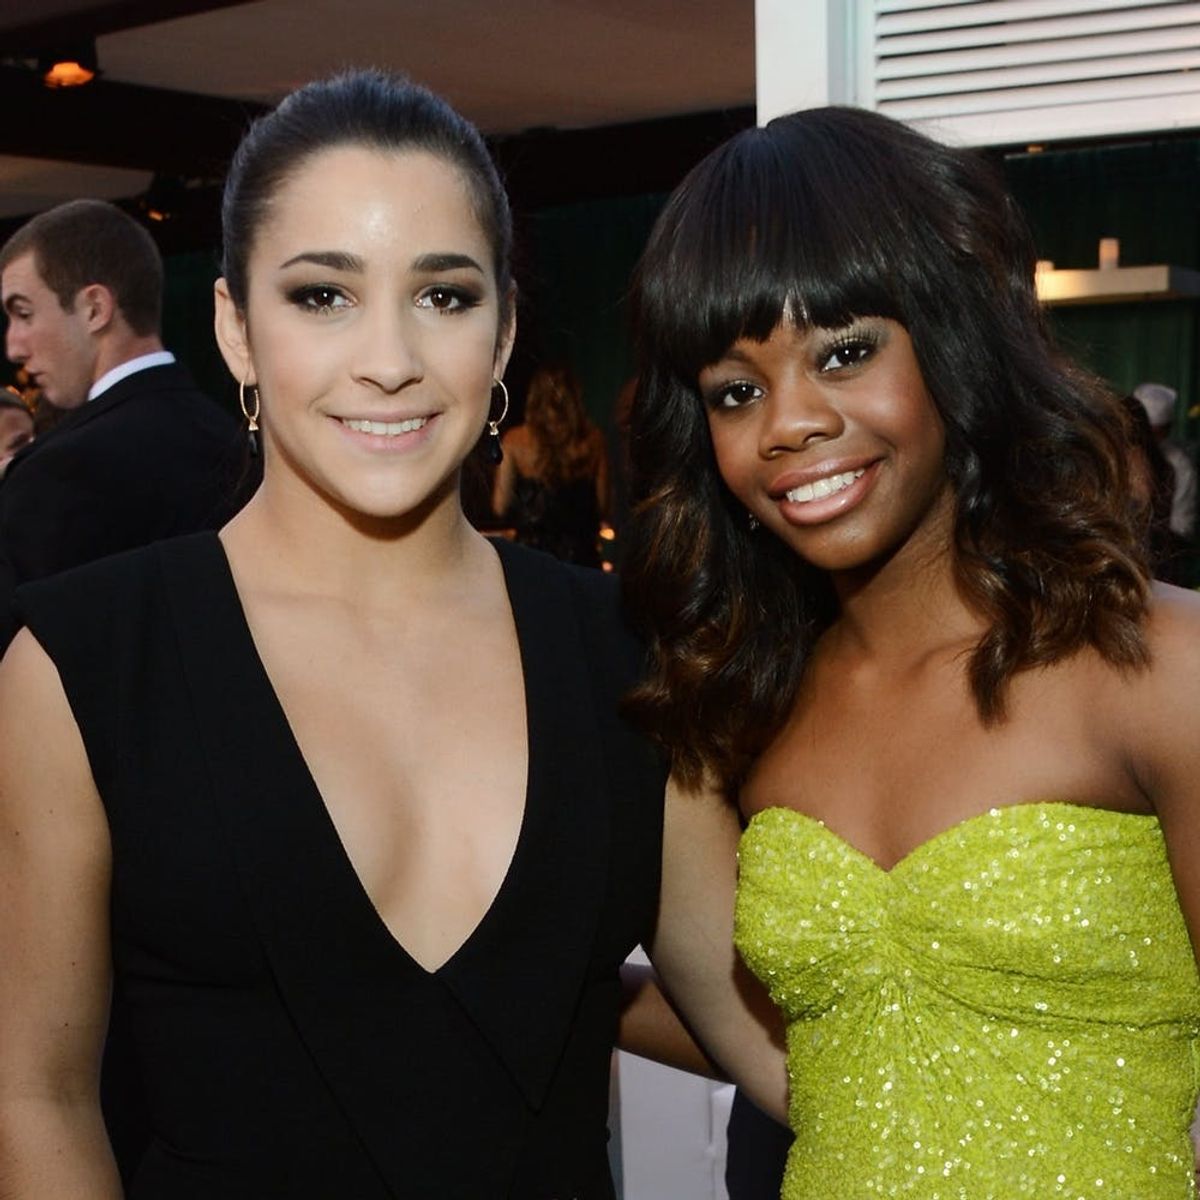 Aly Raisman Is Putting Her Twitter Feud With Gabby Douglas to Bed With a Powerful Show of Support